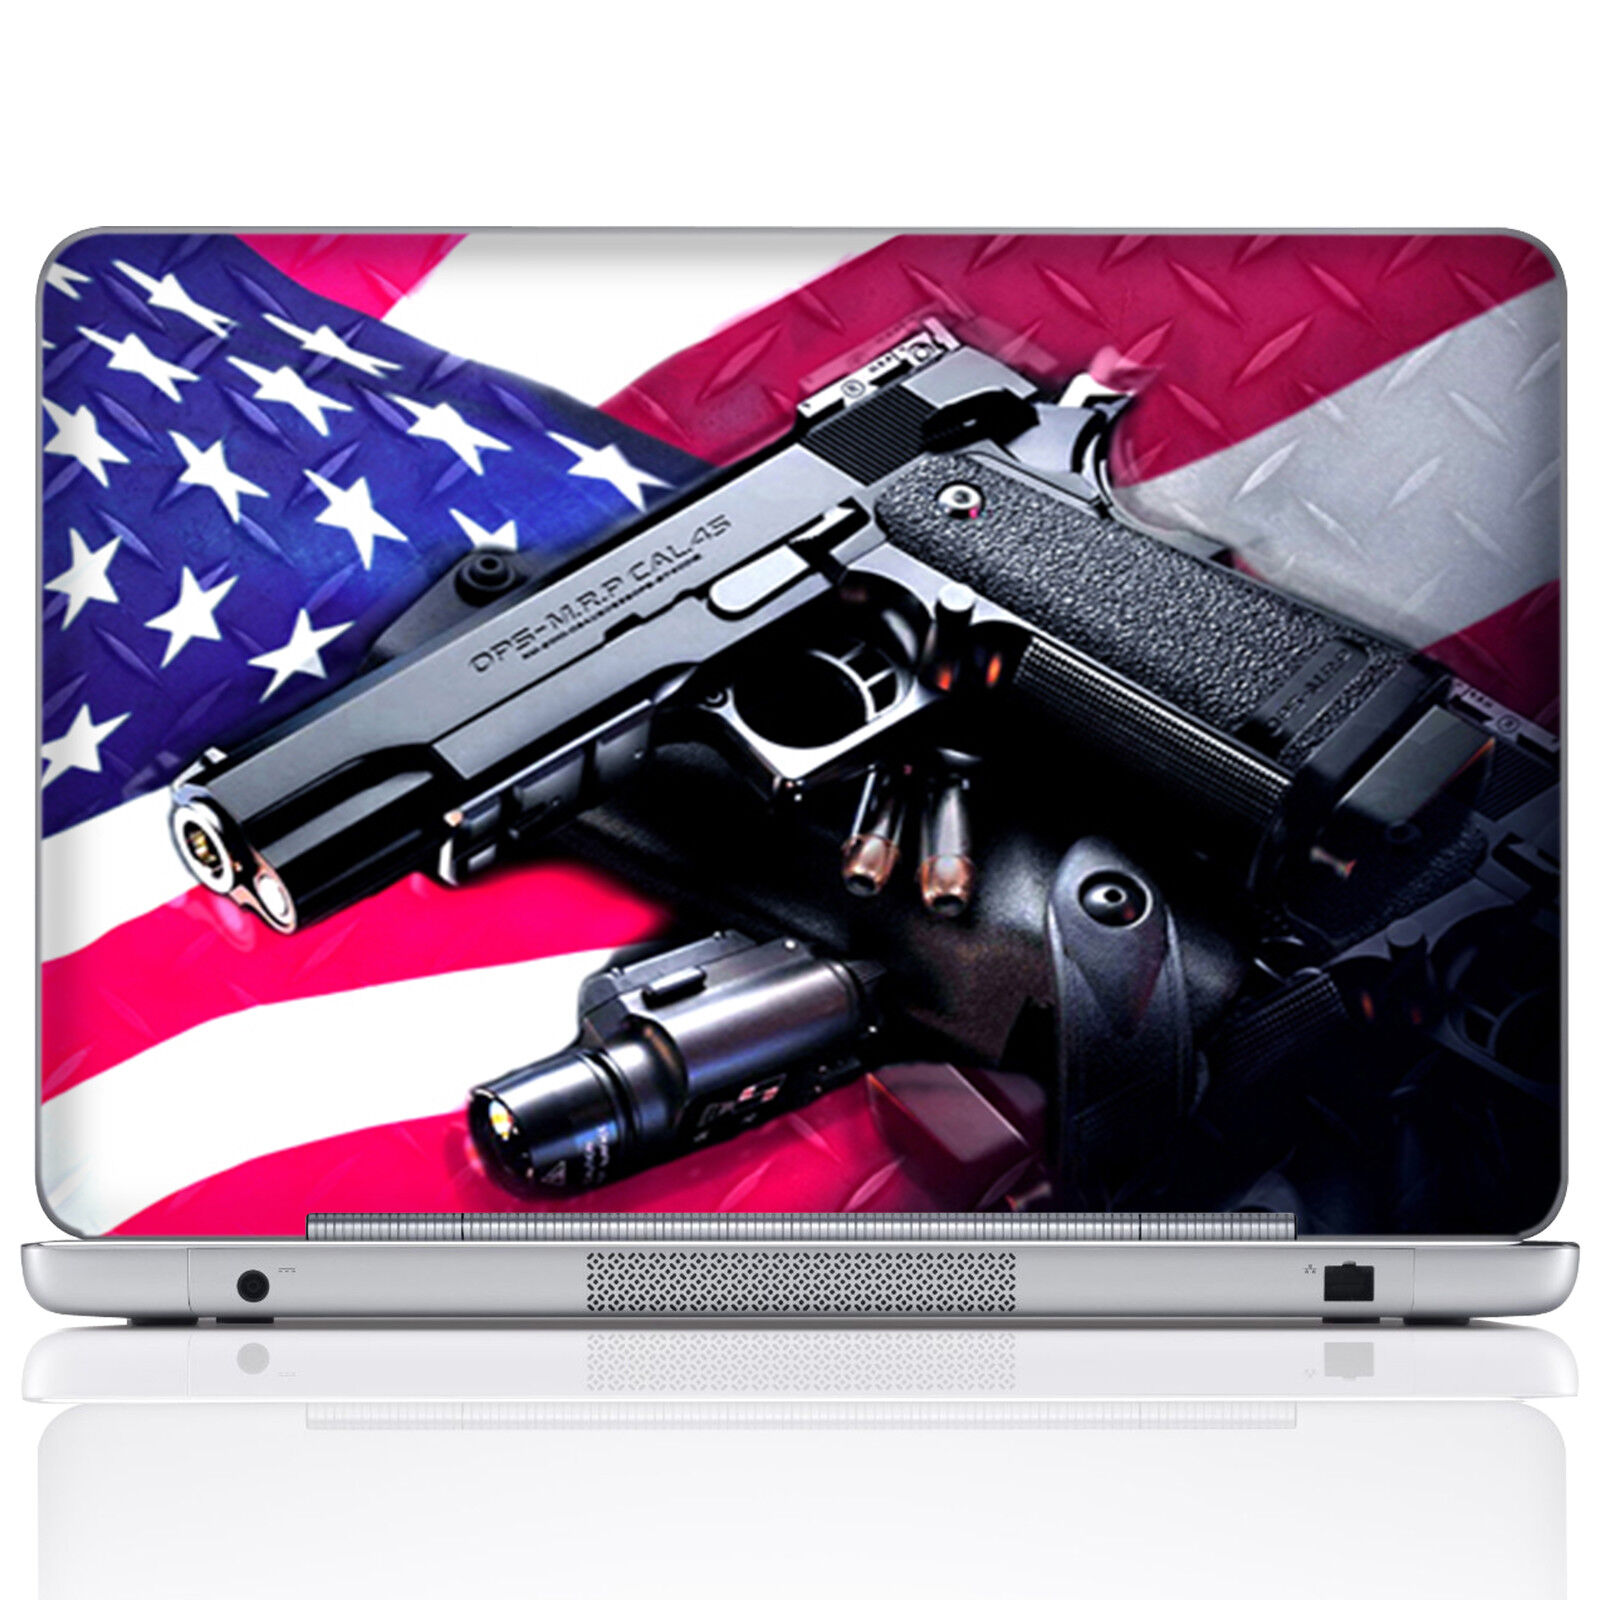 Laptop Skin Sticker Decal Art Cover w Wrist Pads for 10 inch to 17 inch notebook